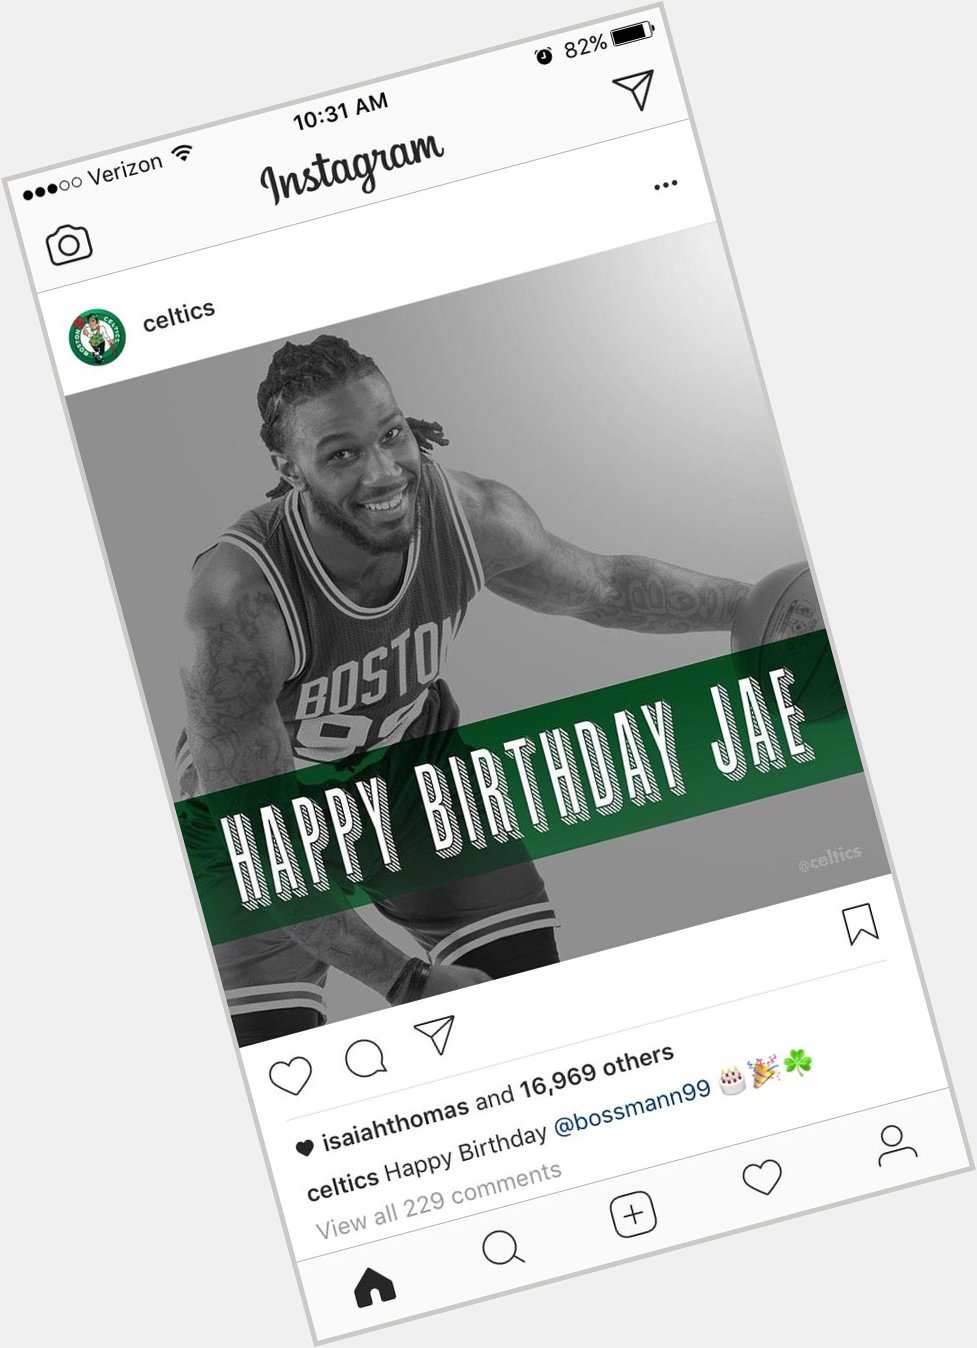 Lol happy bday Jae Crowder, we\re trying to trade you to make room for Hayward 